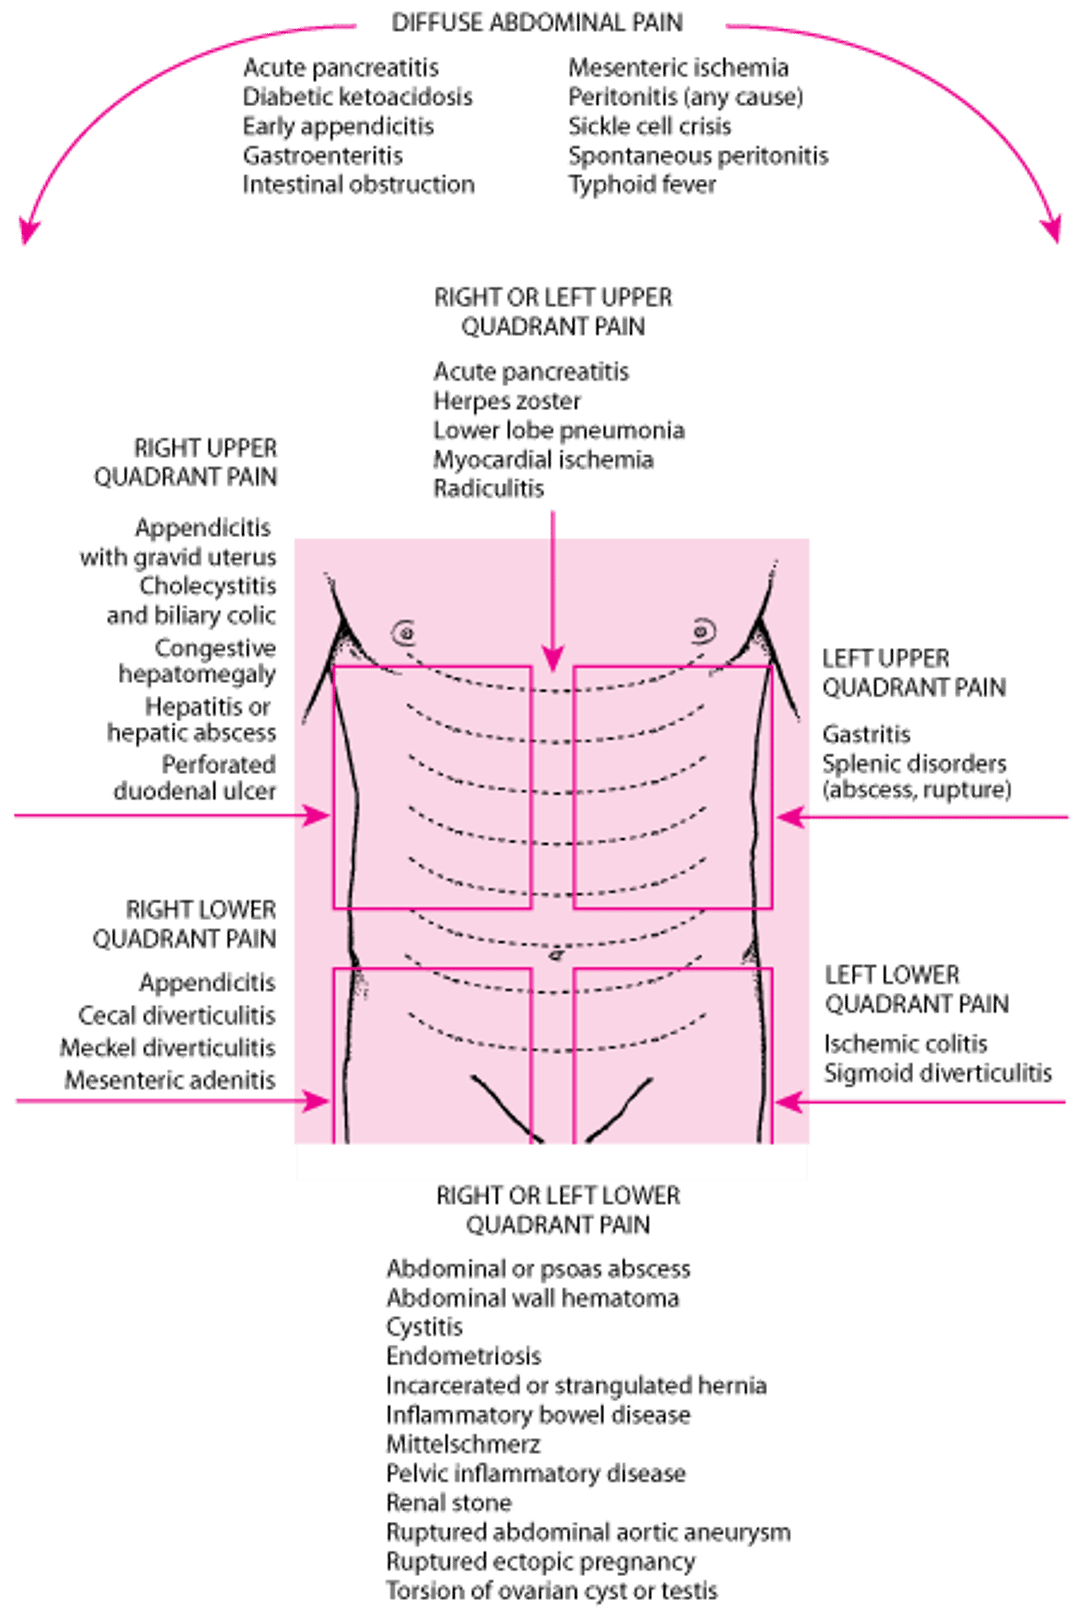 Location of abdominal pain and possible causes